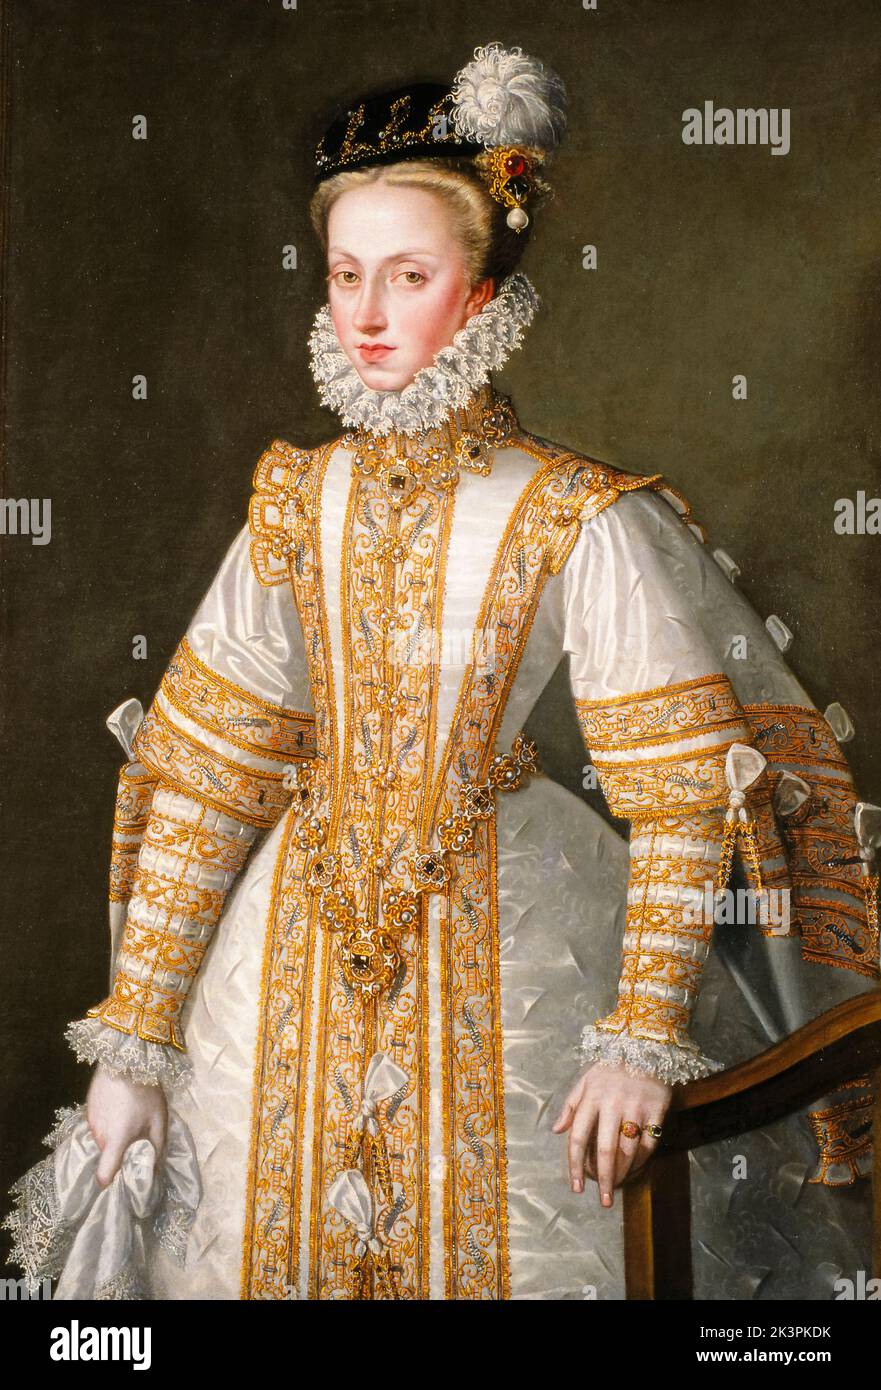 Anna of Austria (1549-1580), Queen Consort of Spain by marriage to her uncle King Philip II of Spain, also briefly Queen Consort of Portugal (September-October 1580), portrait painting in oil on canvas by Alonso Sánchez Coello, circa 1571 Stock Photo